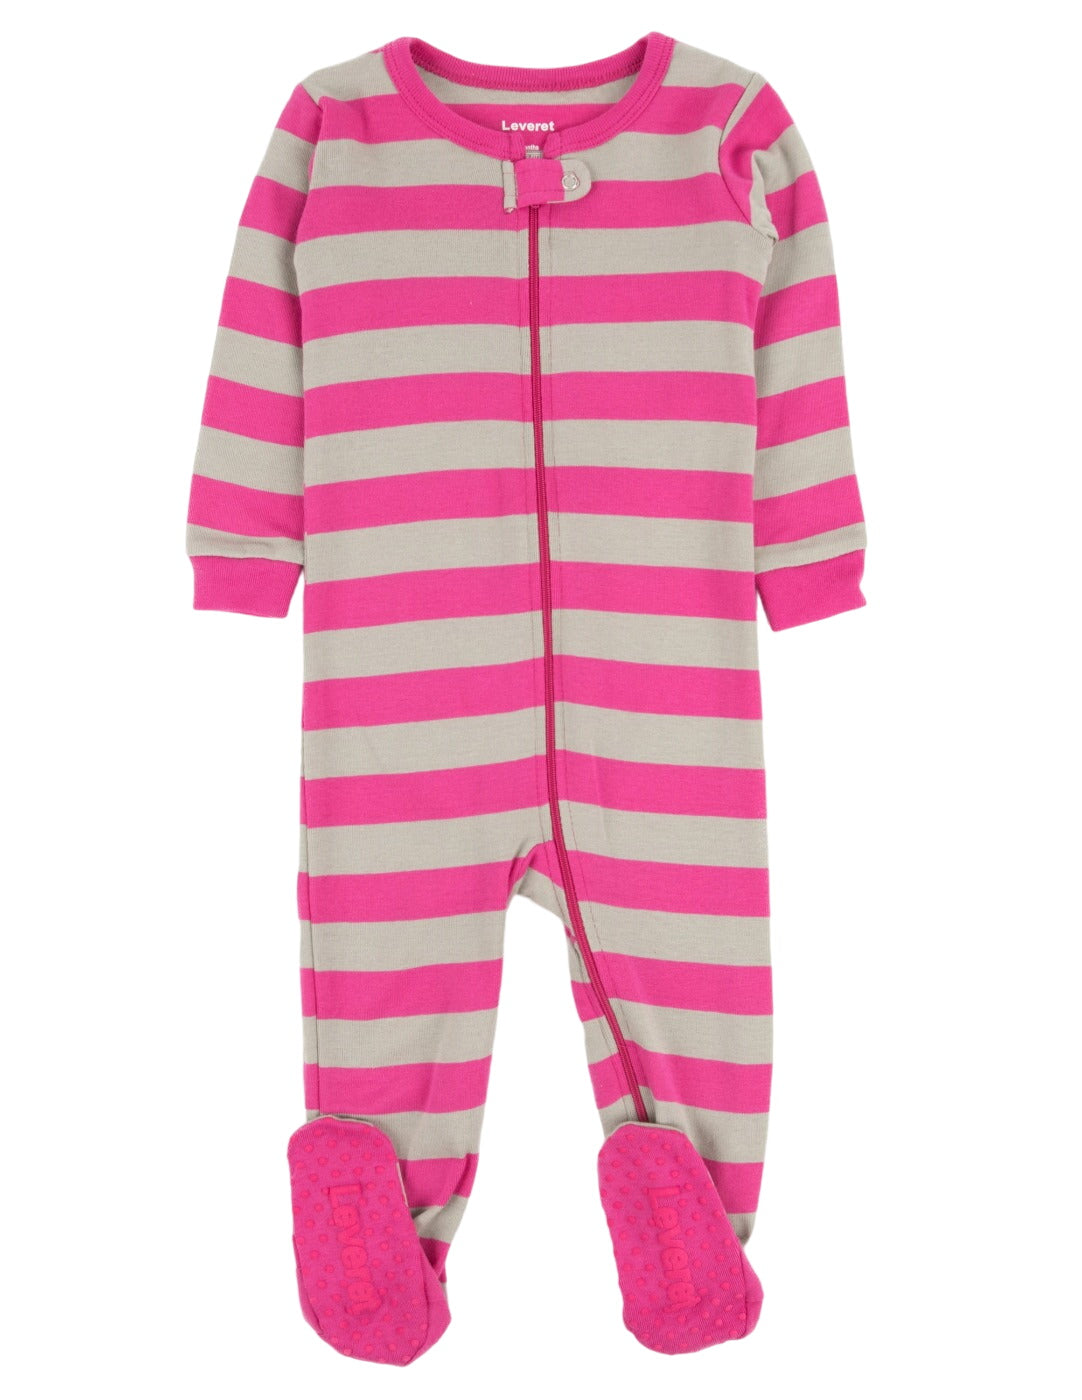 Kids Footed Berry & Chime Stripes Pajamas